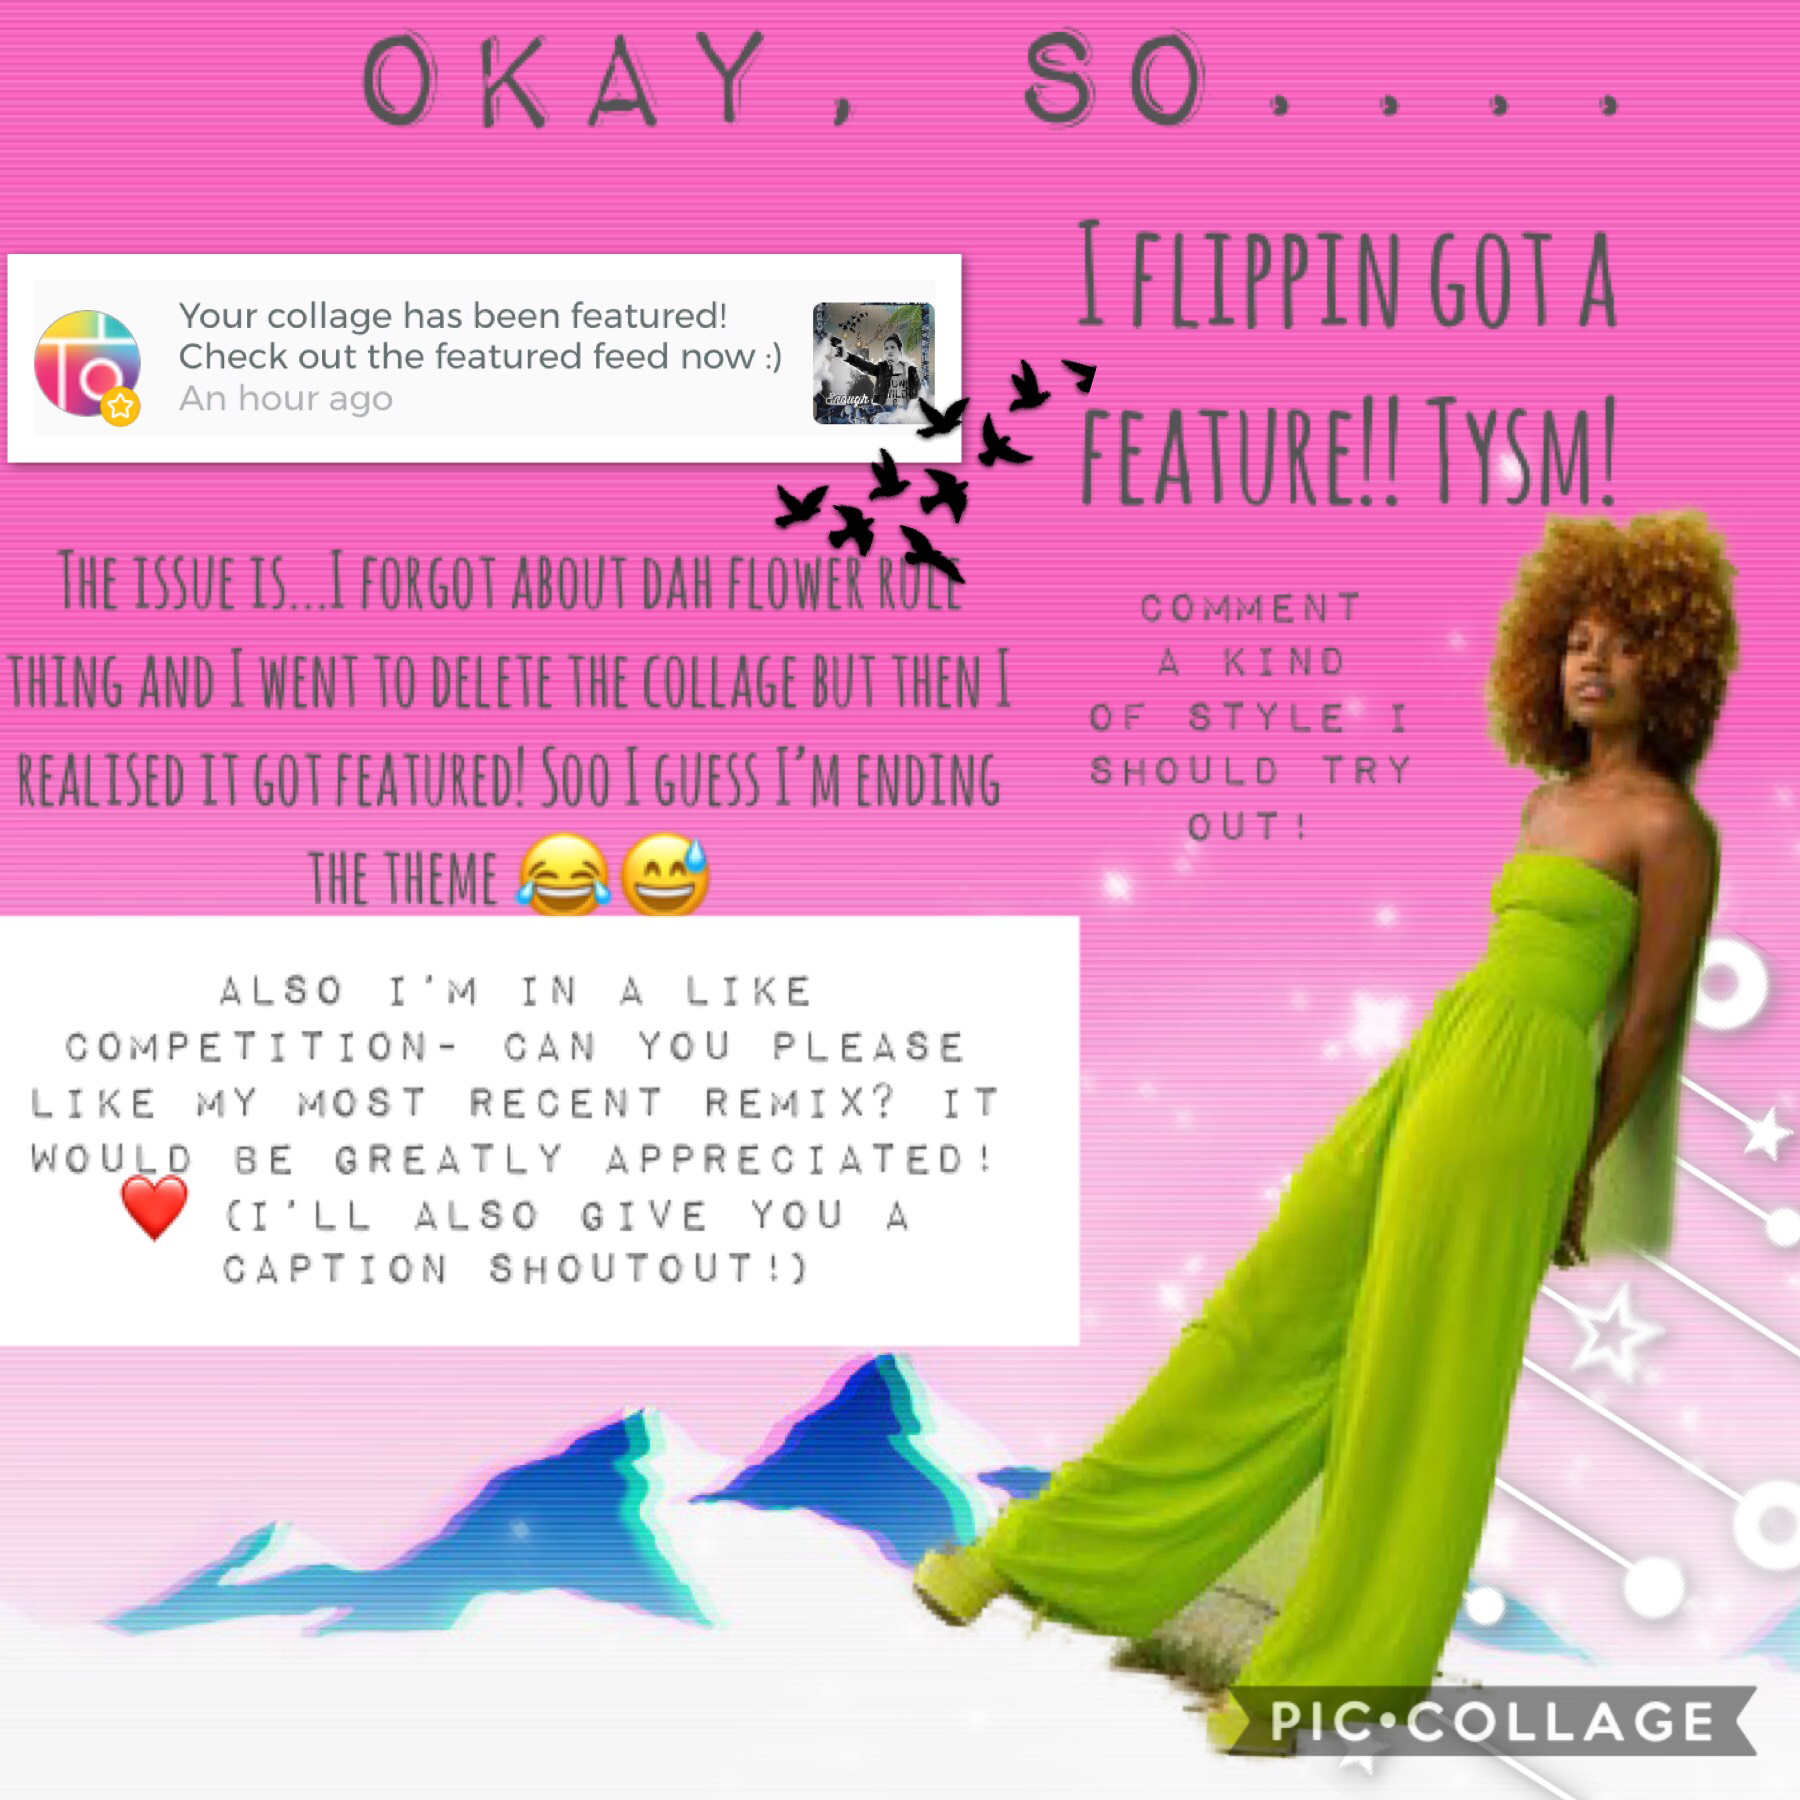 Tysm PC! Please like my most recent remix. I don’t like self-advertising but the competition says I should. Also I entered late so I don’t have much time! 😓. Love y’all so so so much! Have a super awesome very fun day!! 😘